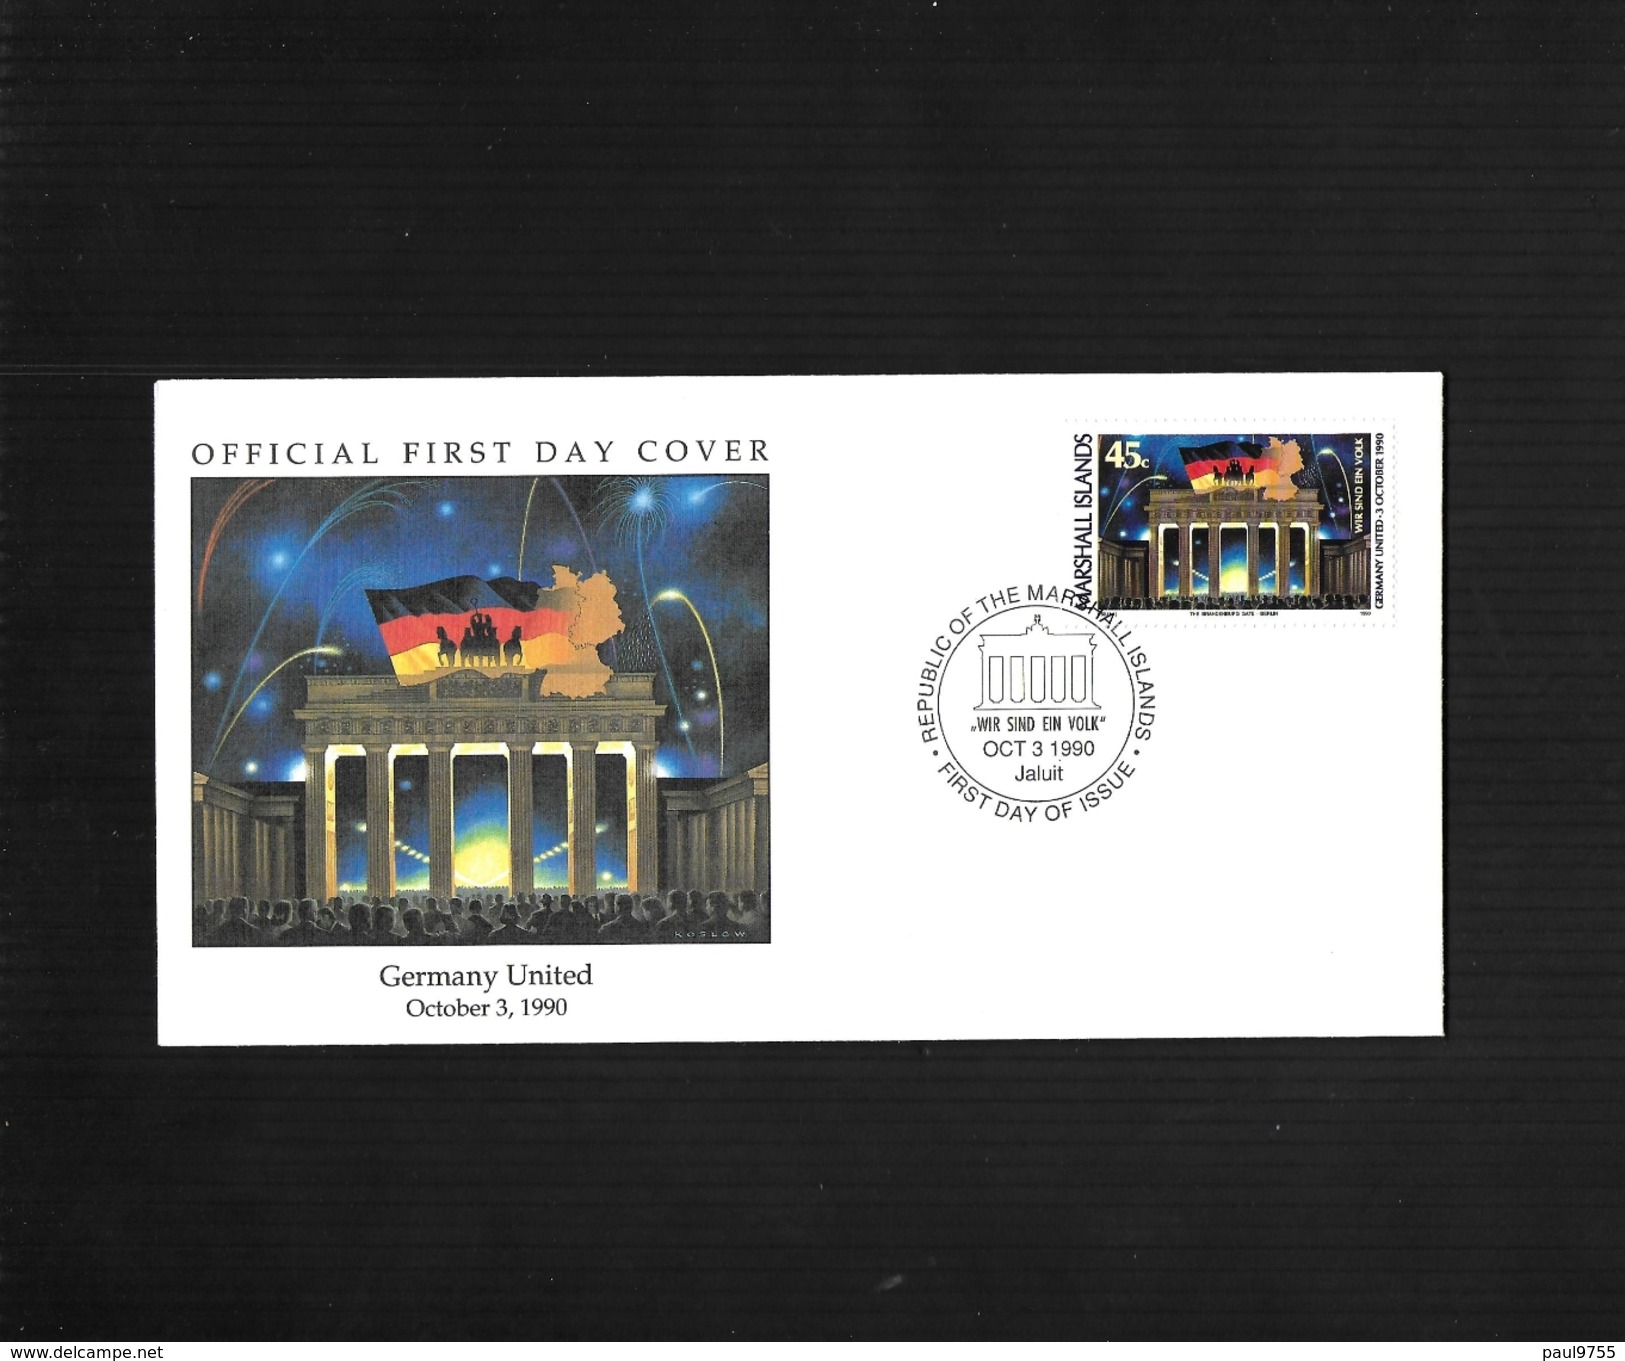 MARSHALL ISLANDS 03/10/1990 FDC GERMANY UNITED-UNITE DE L'ALLEMAGNE - Marshall